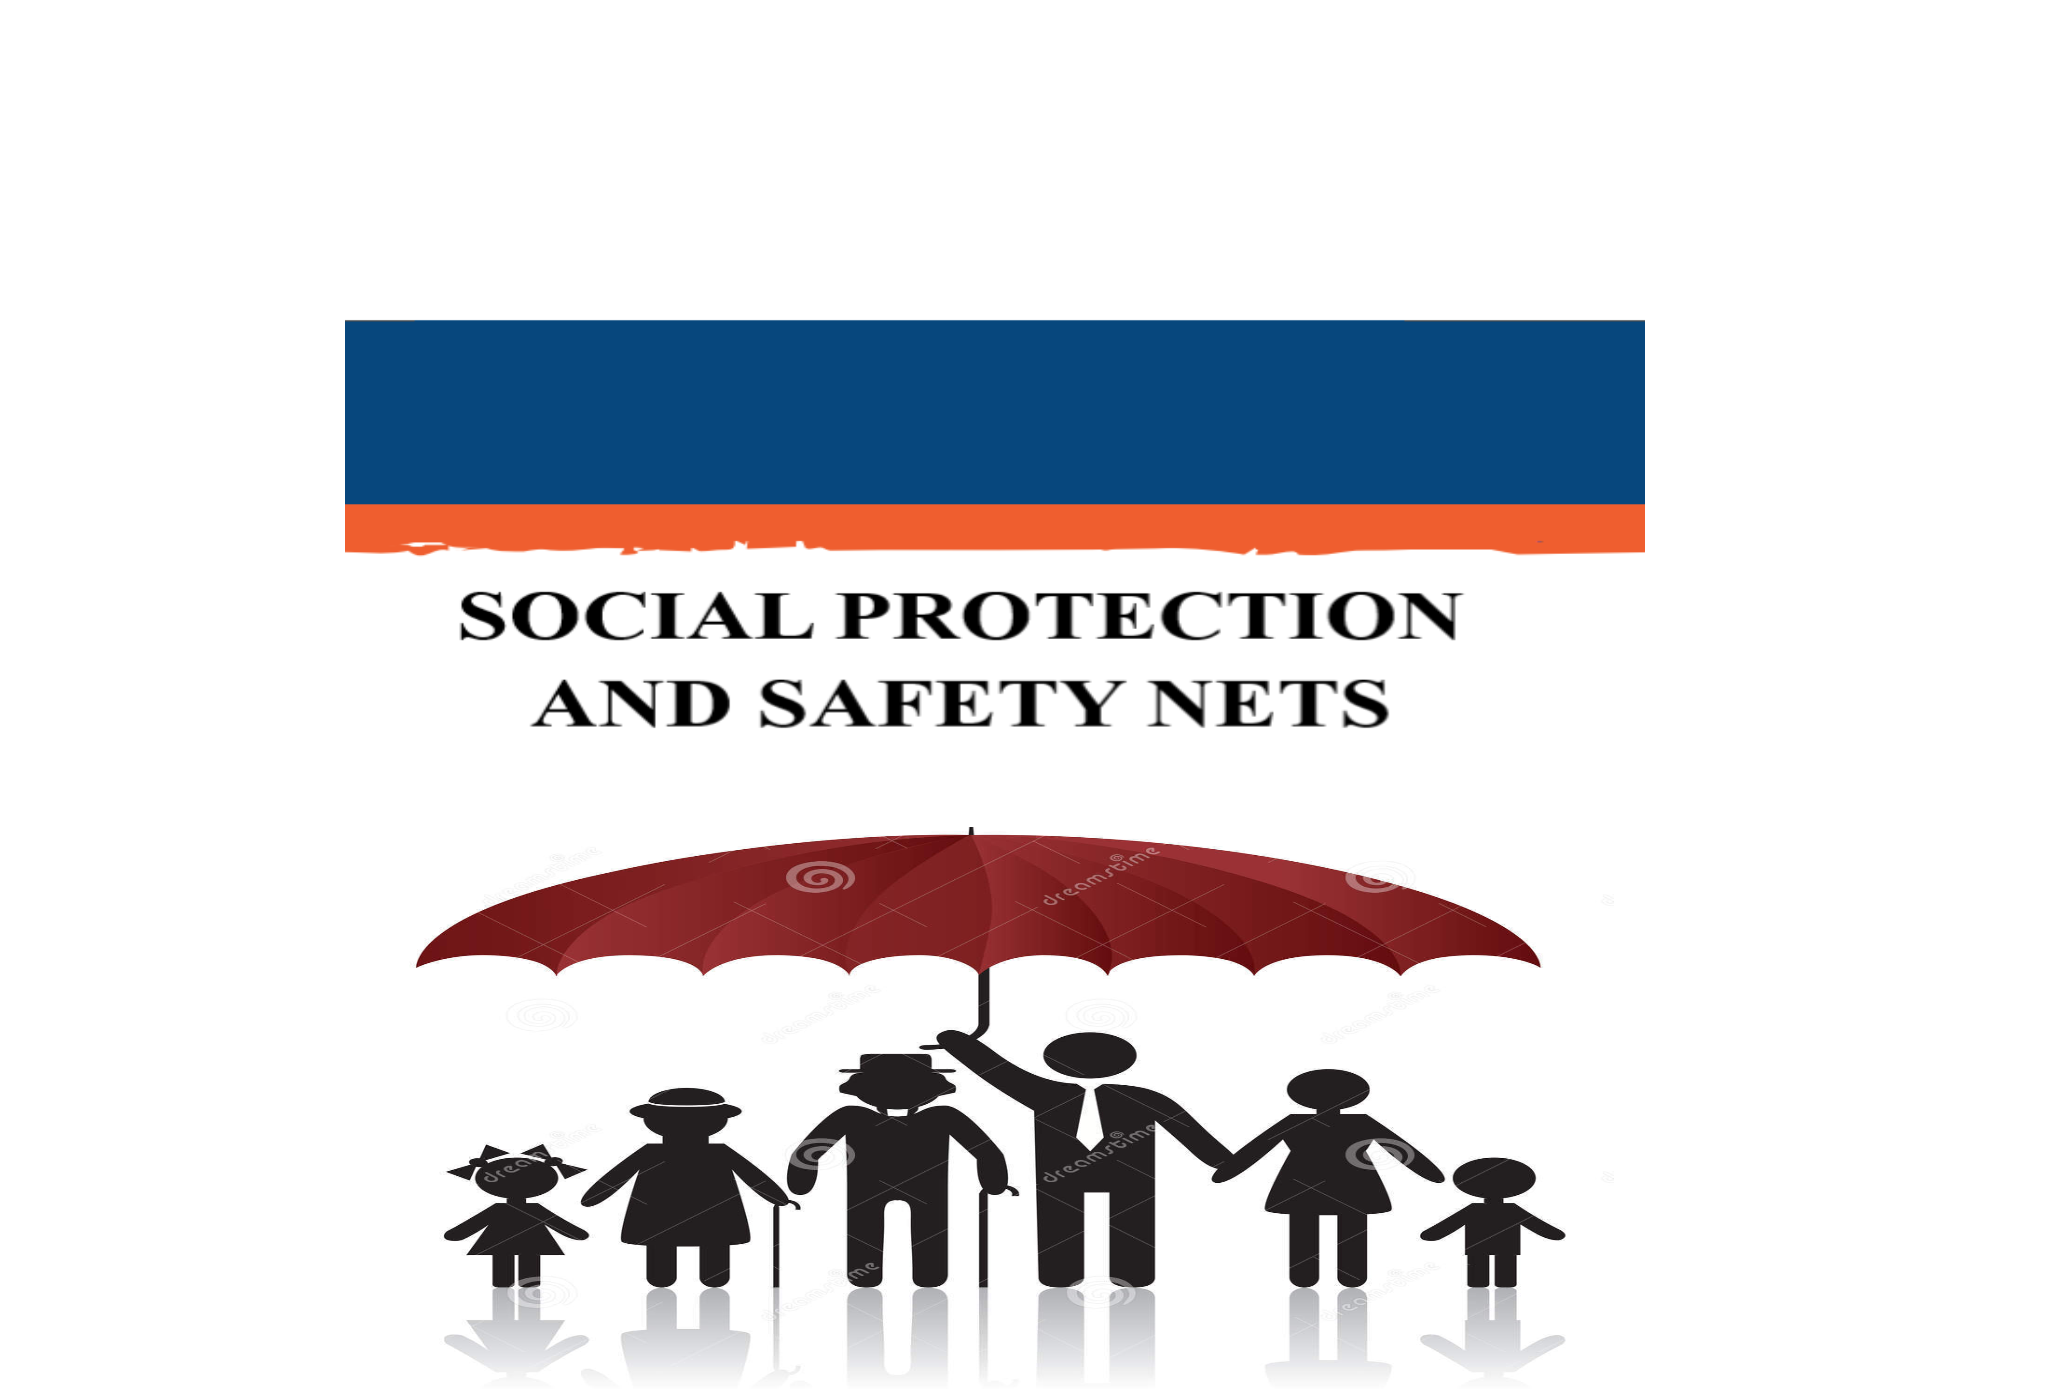 TRAINING COURSE ON SOCIAL PROTECTION AND SAFETY NETS, Nairobi, Kenya